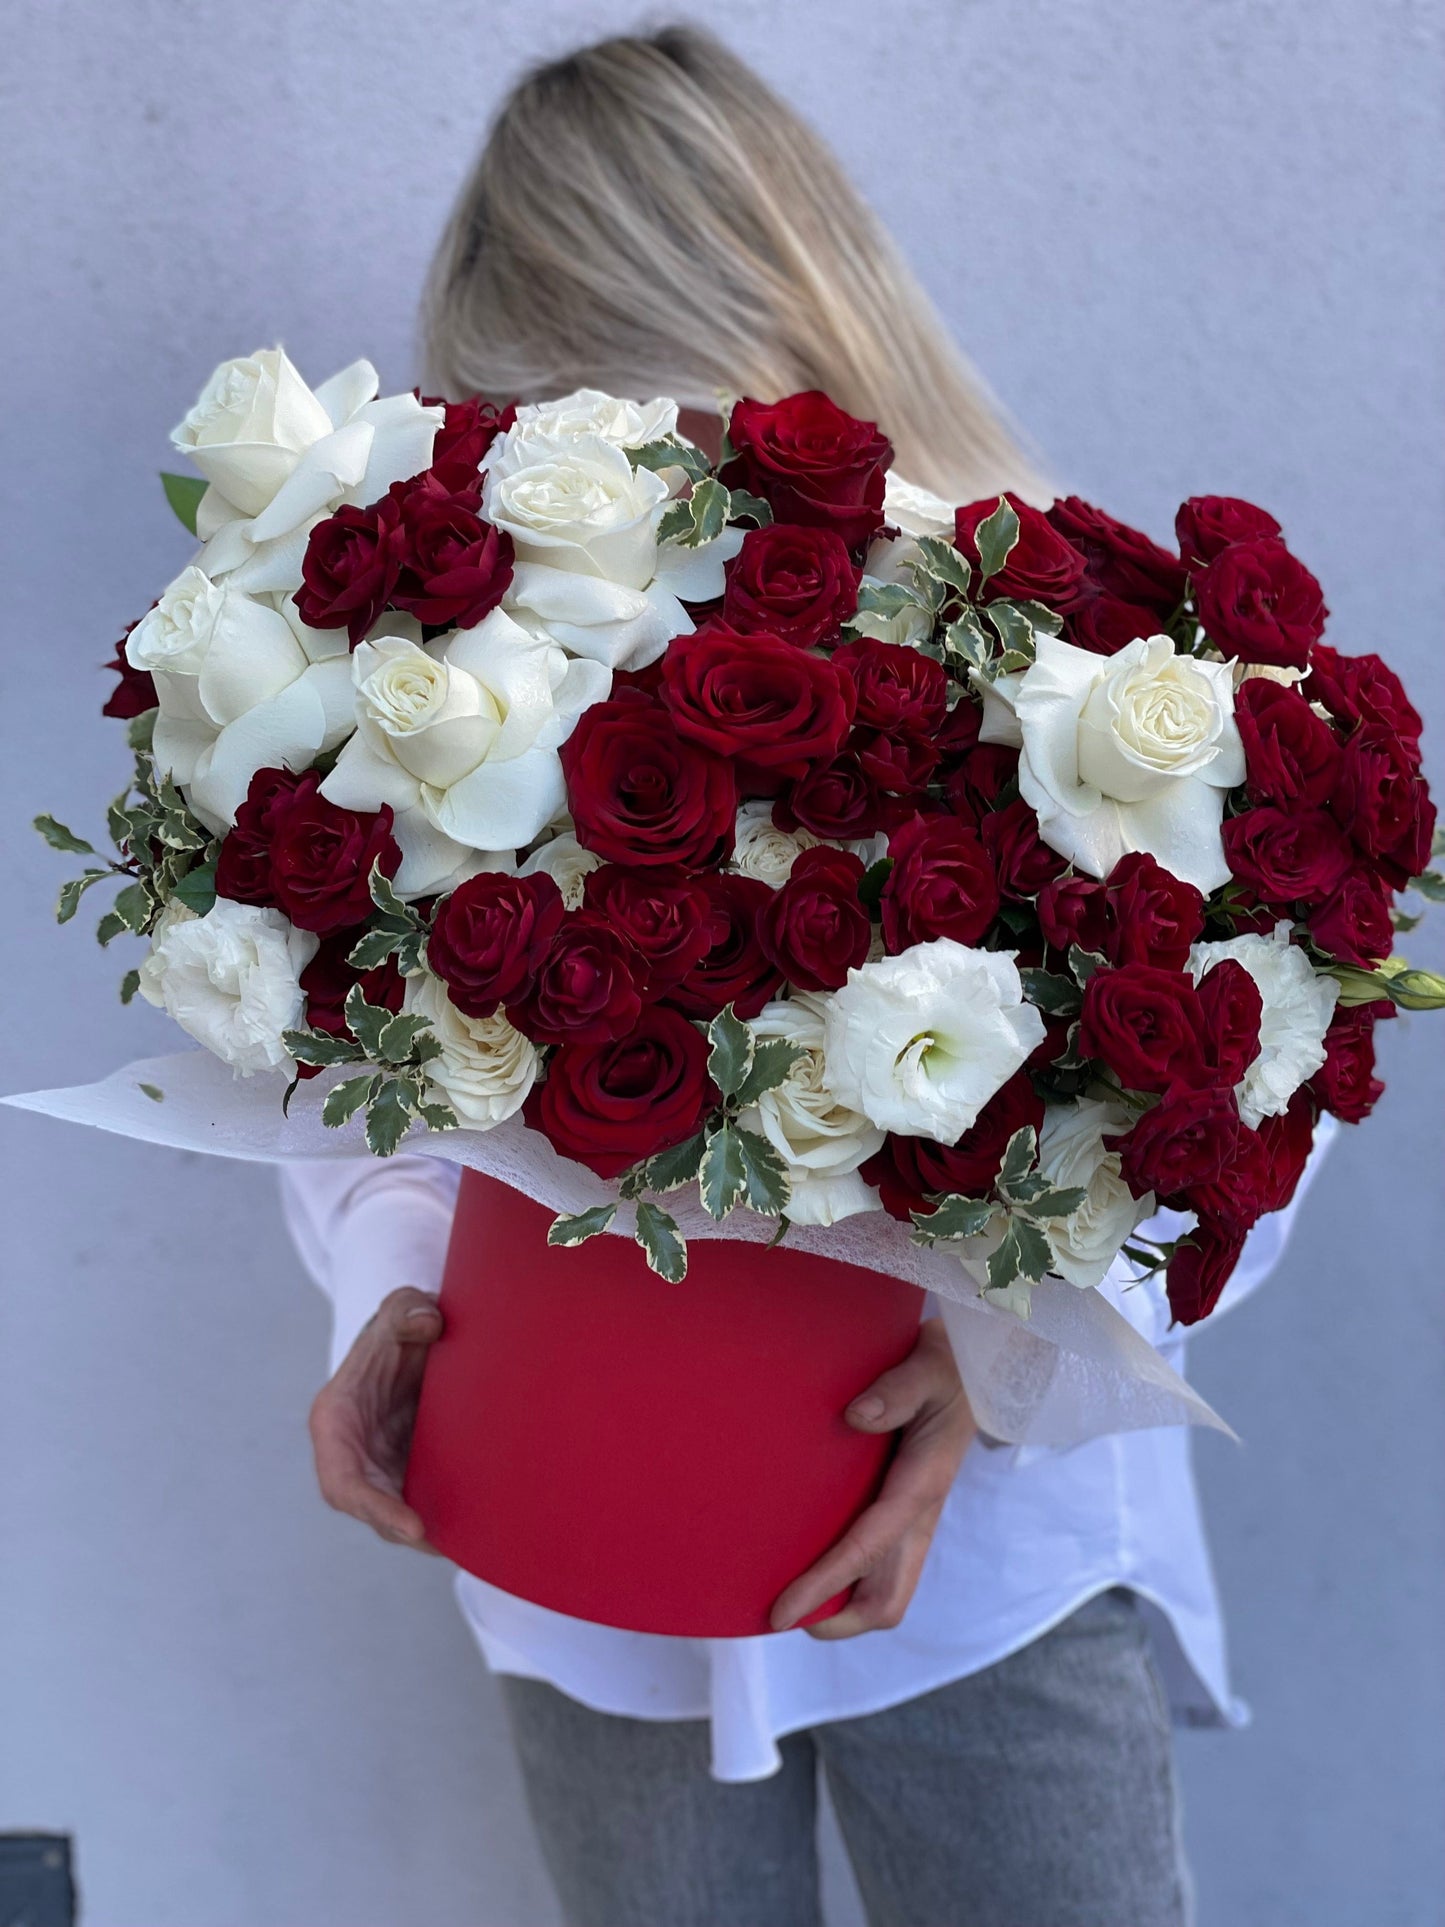 Mix of white and red roses